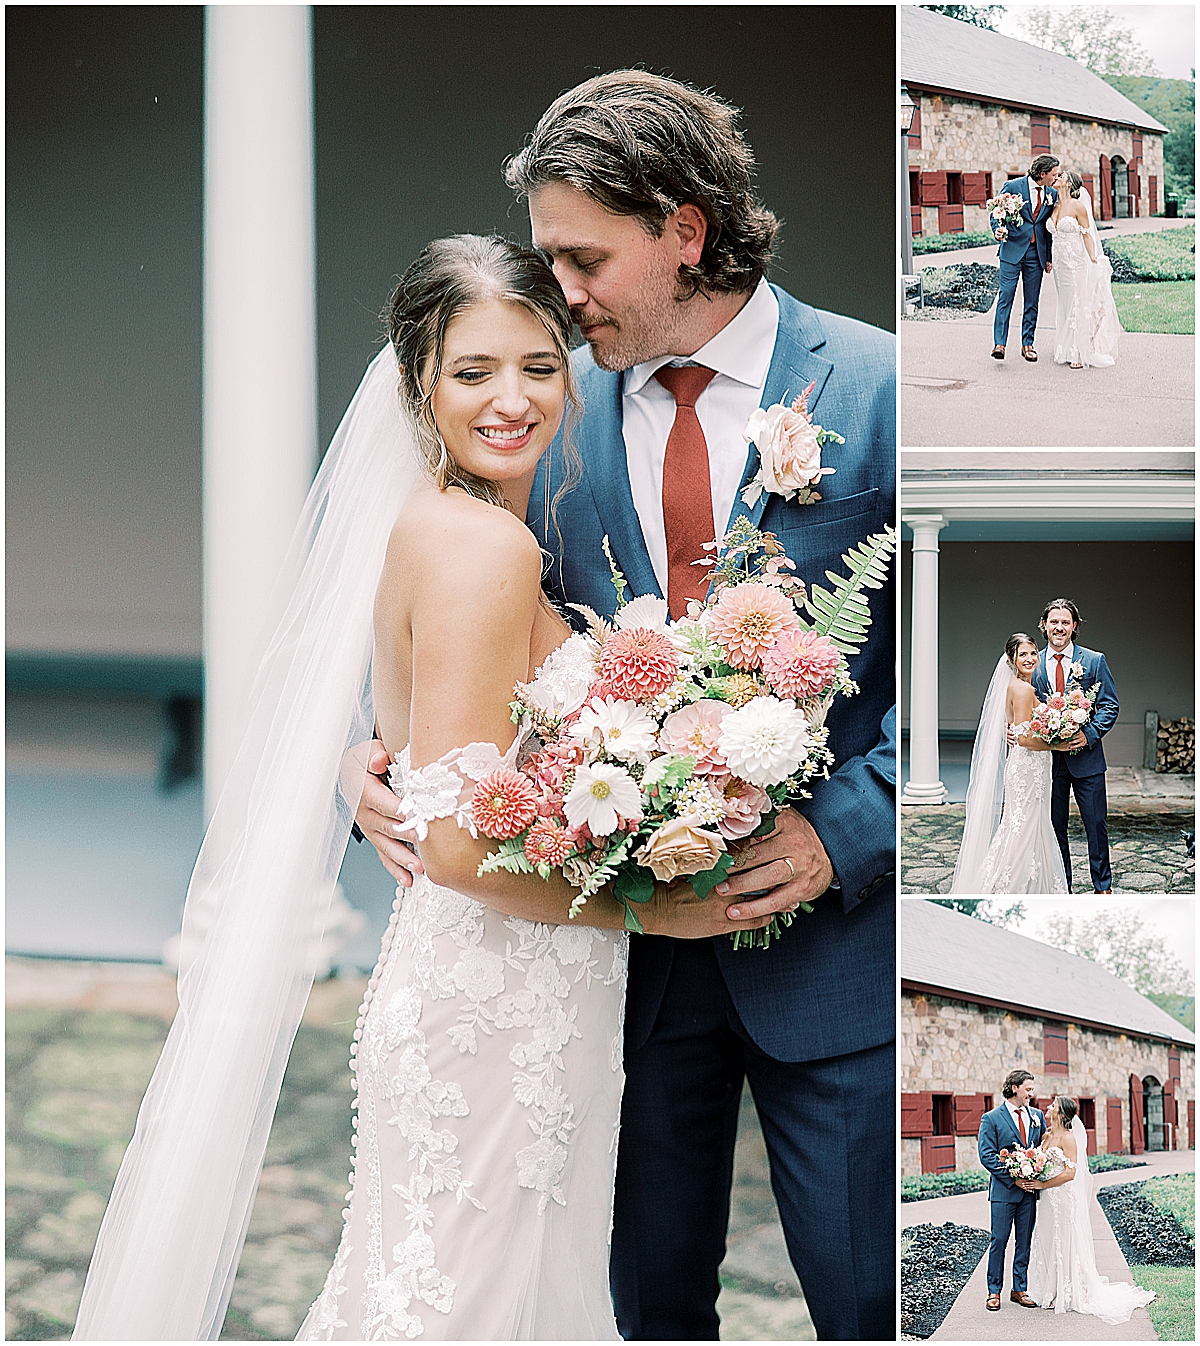 newly married couple portraits with long veil and holding floral wedding bouquet